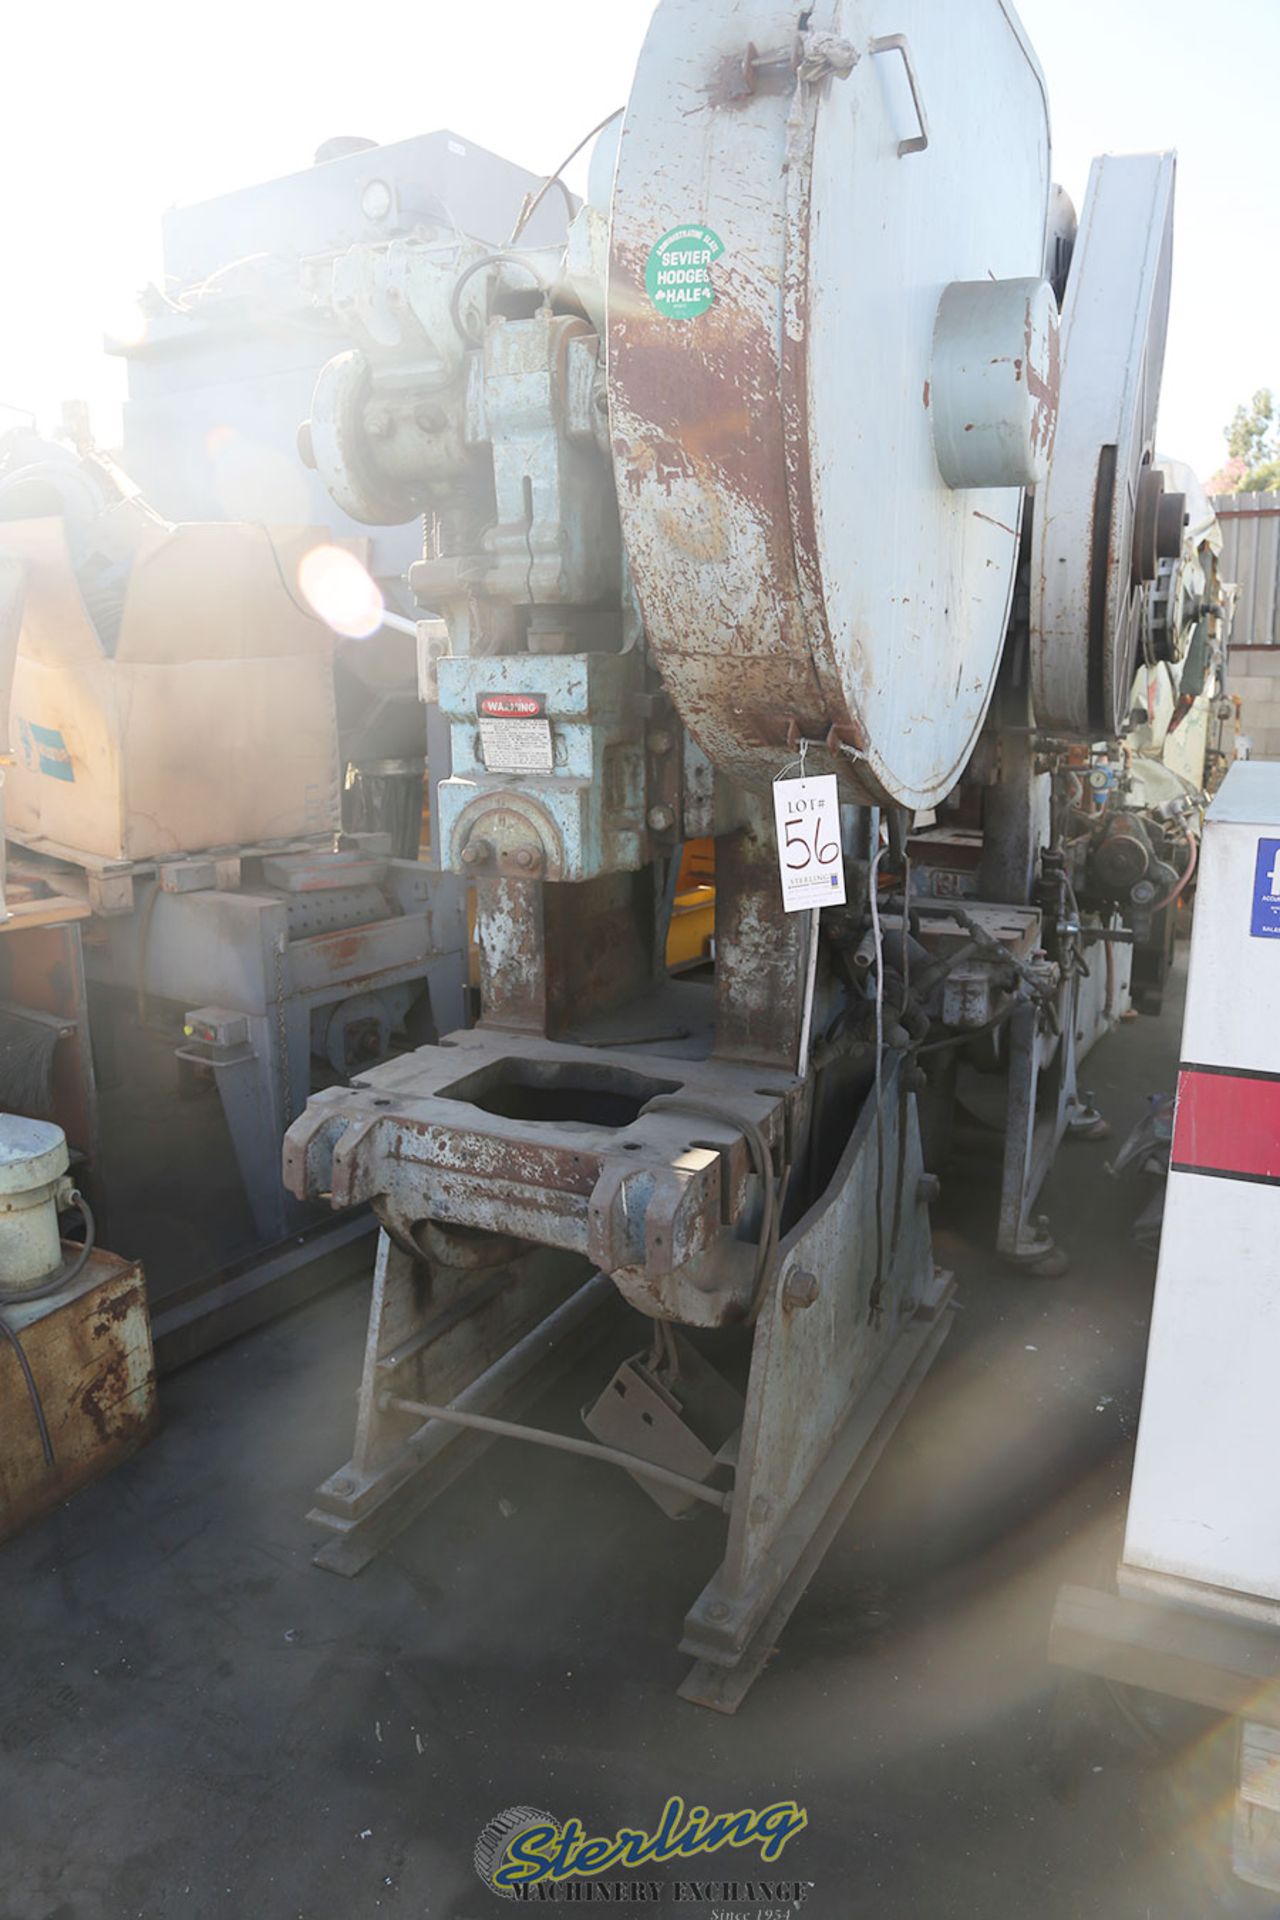 45 Ton x 4" Used Niagara, Mdl. A3-1/2,28" x 18" Bed, Air - Image 3 of 7